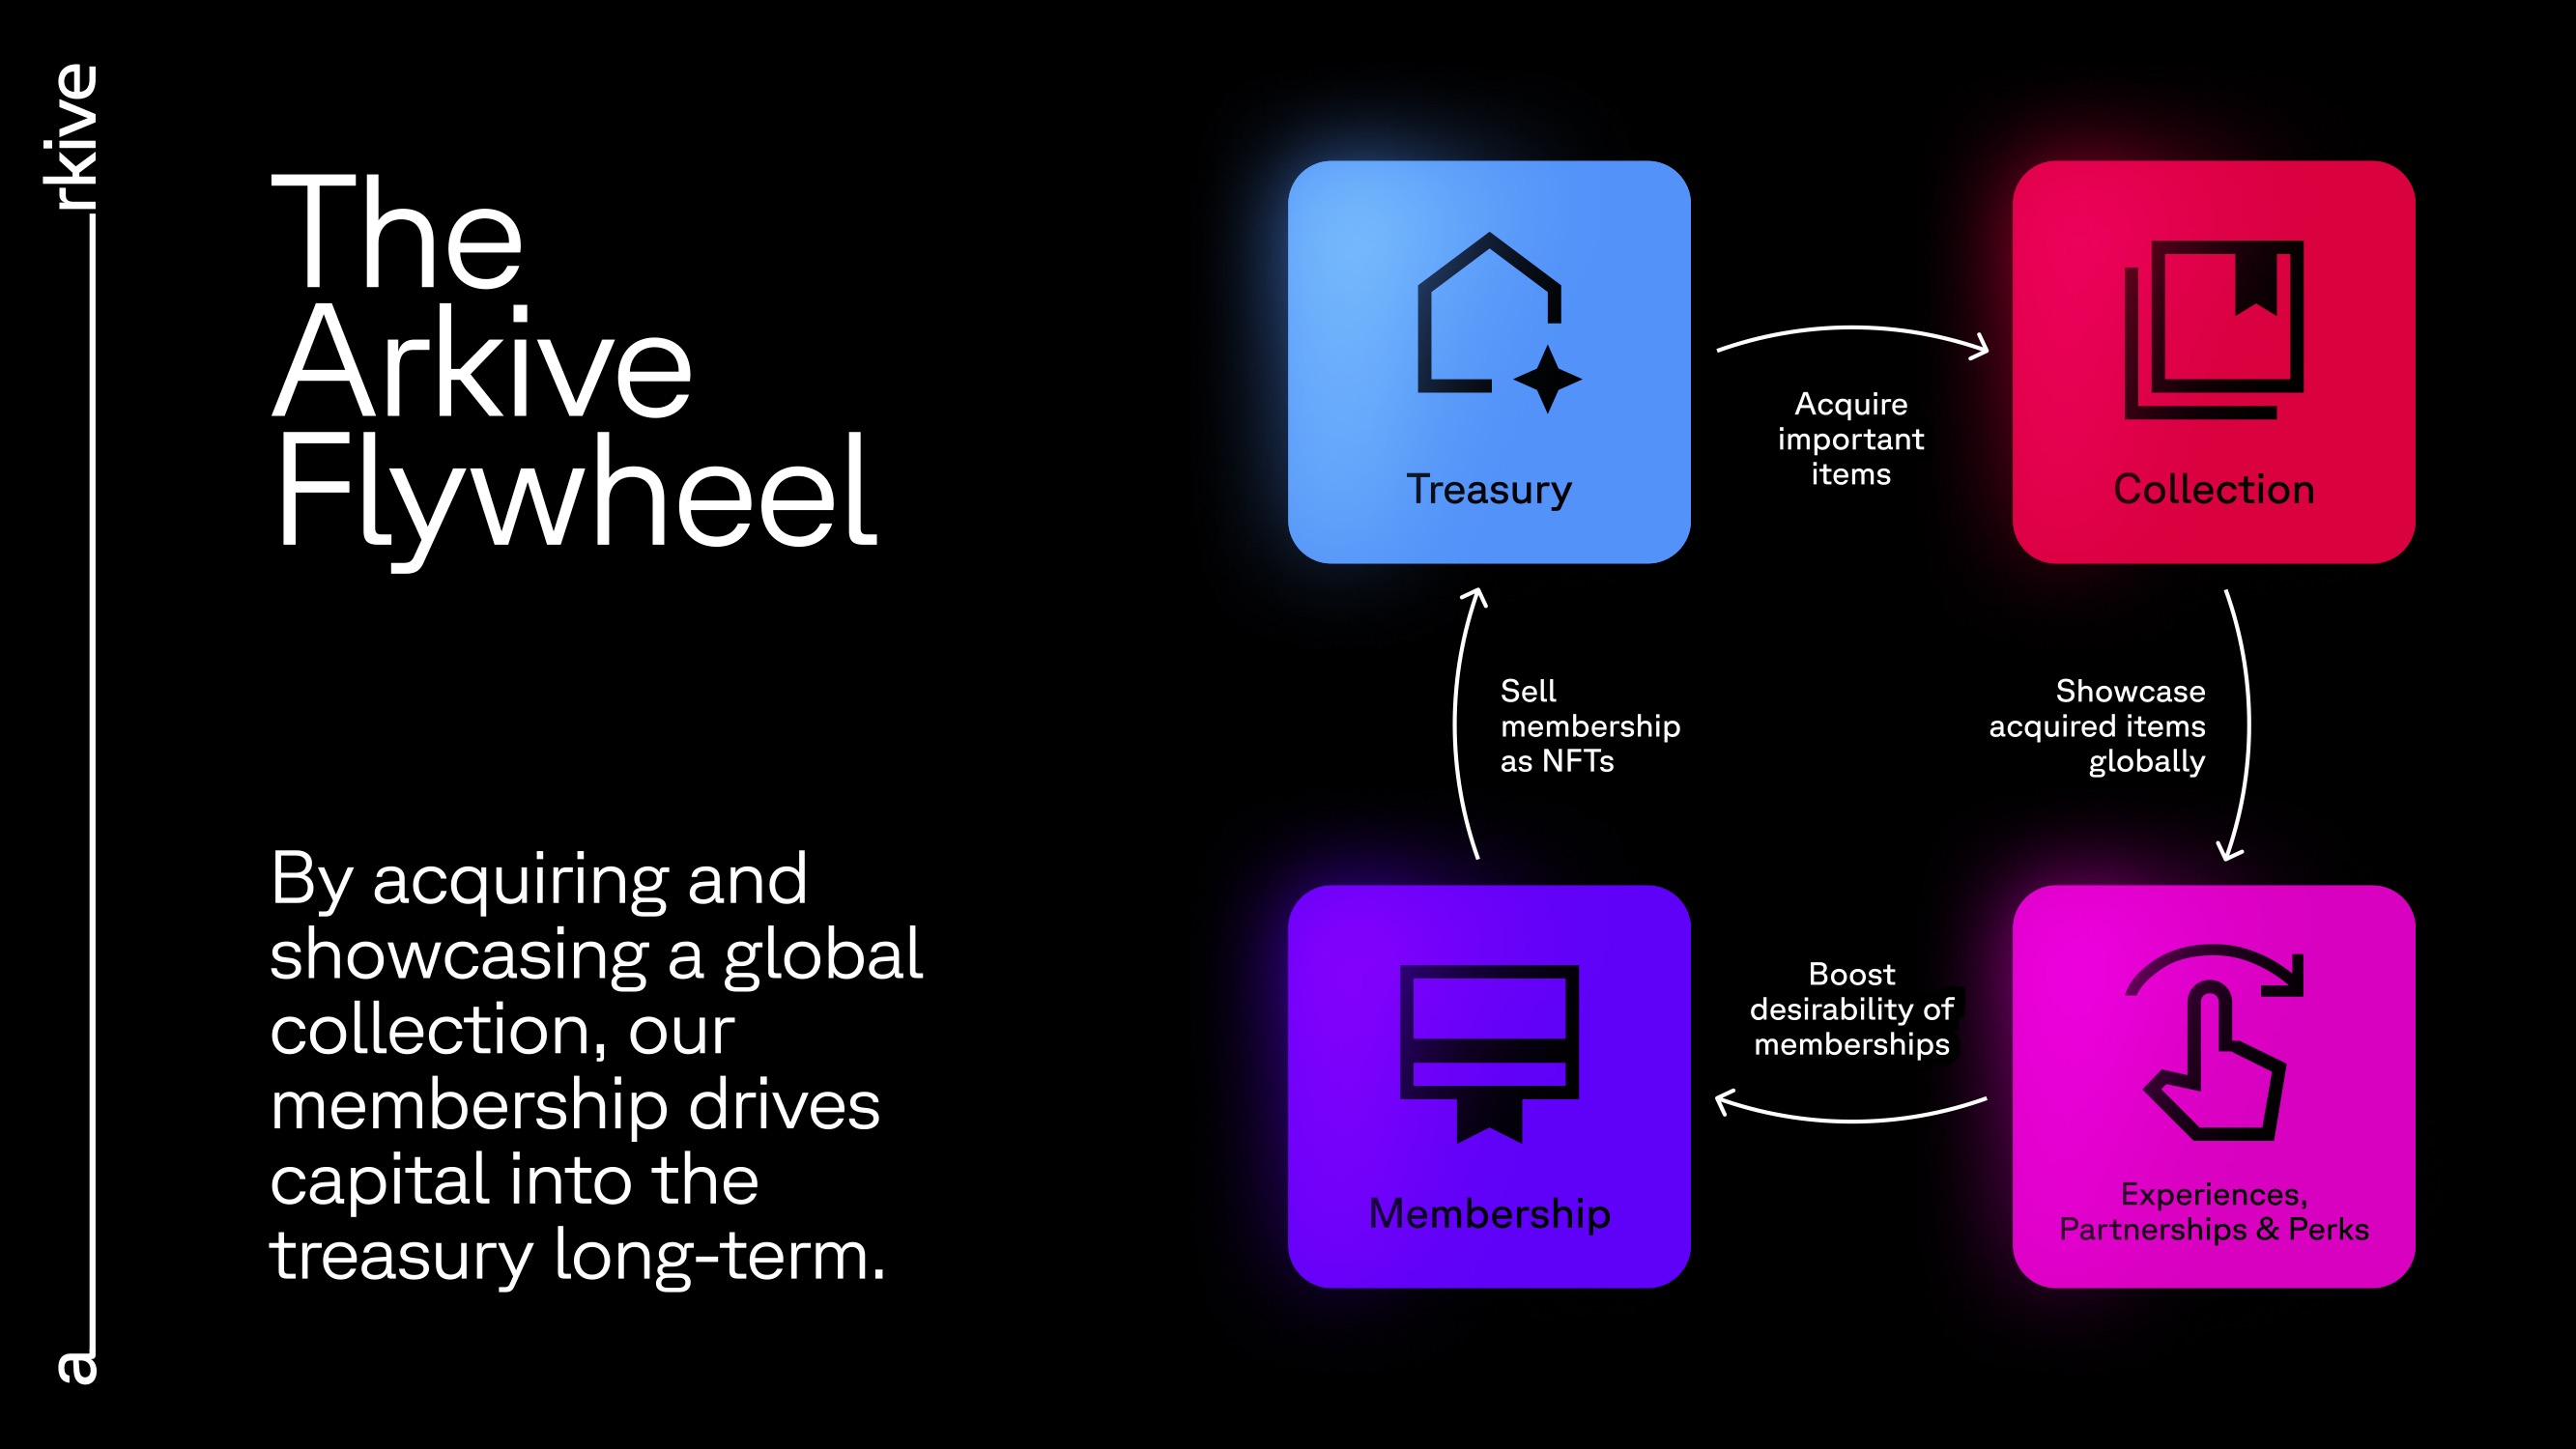 Flywheel: By acquiring and exhibiting a global collection, our membership drives capital into the treasury over the long term.